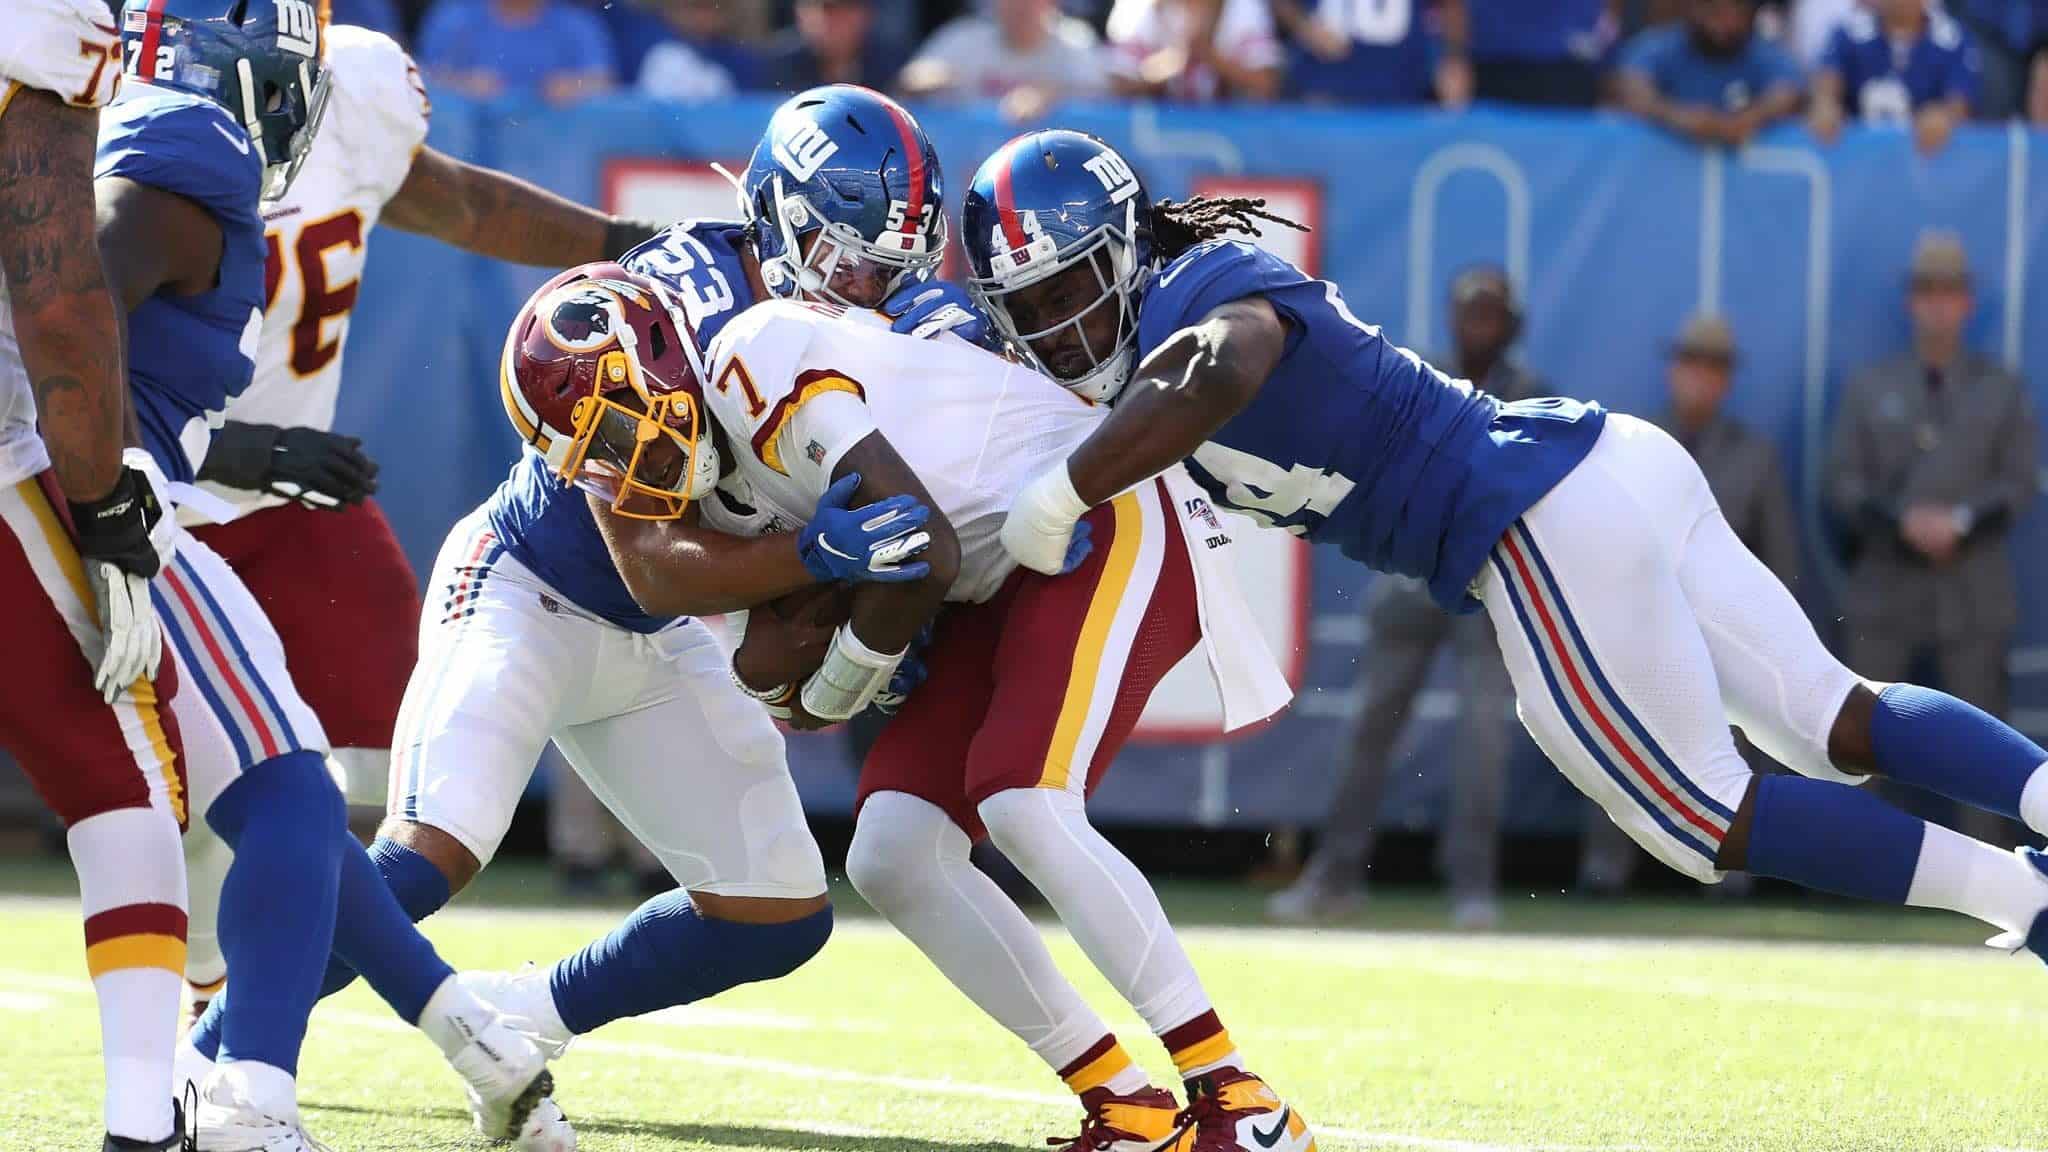 EAST RUTHERFORD, NEW JERSEY - SEPTEMBER 29: Oshane Ximines #53 and Markus Golden #44 of the New York Giants sack Dwayne Haskins #7 of the Washington Redskins during their game at MetLife Stadium on September 29, 2019 in East Rutherford, New Jersey.